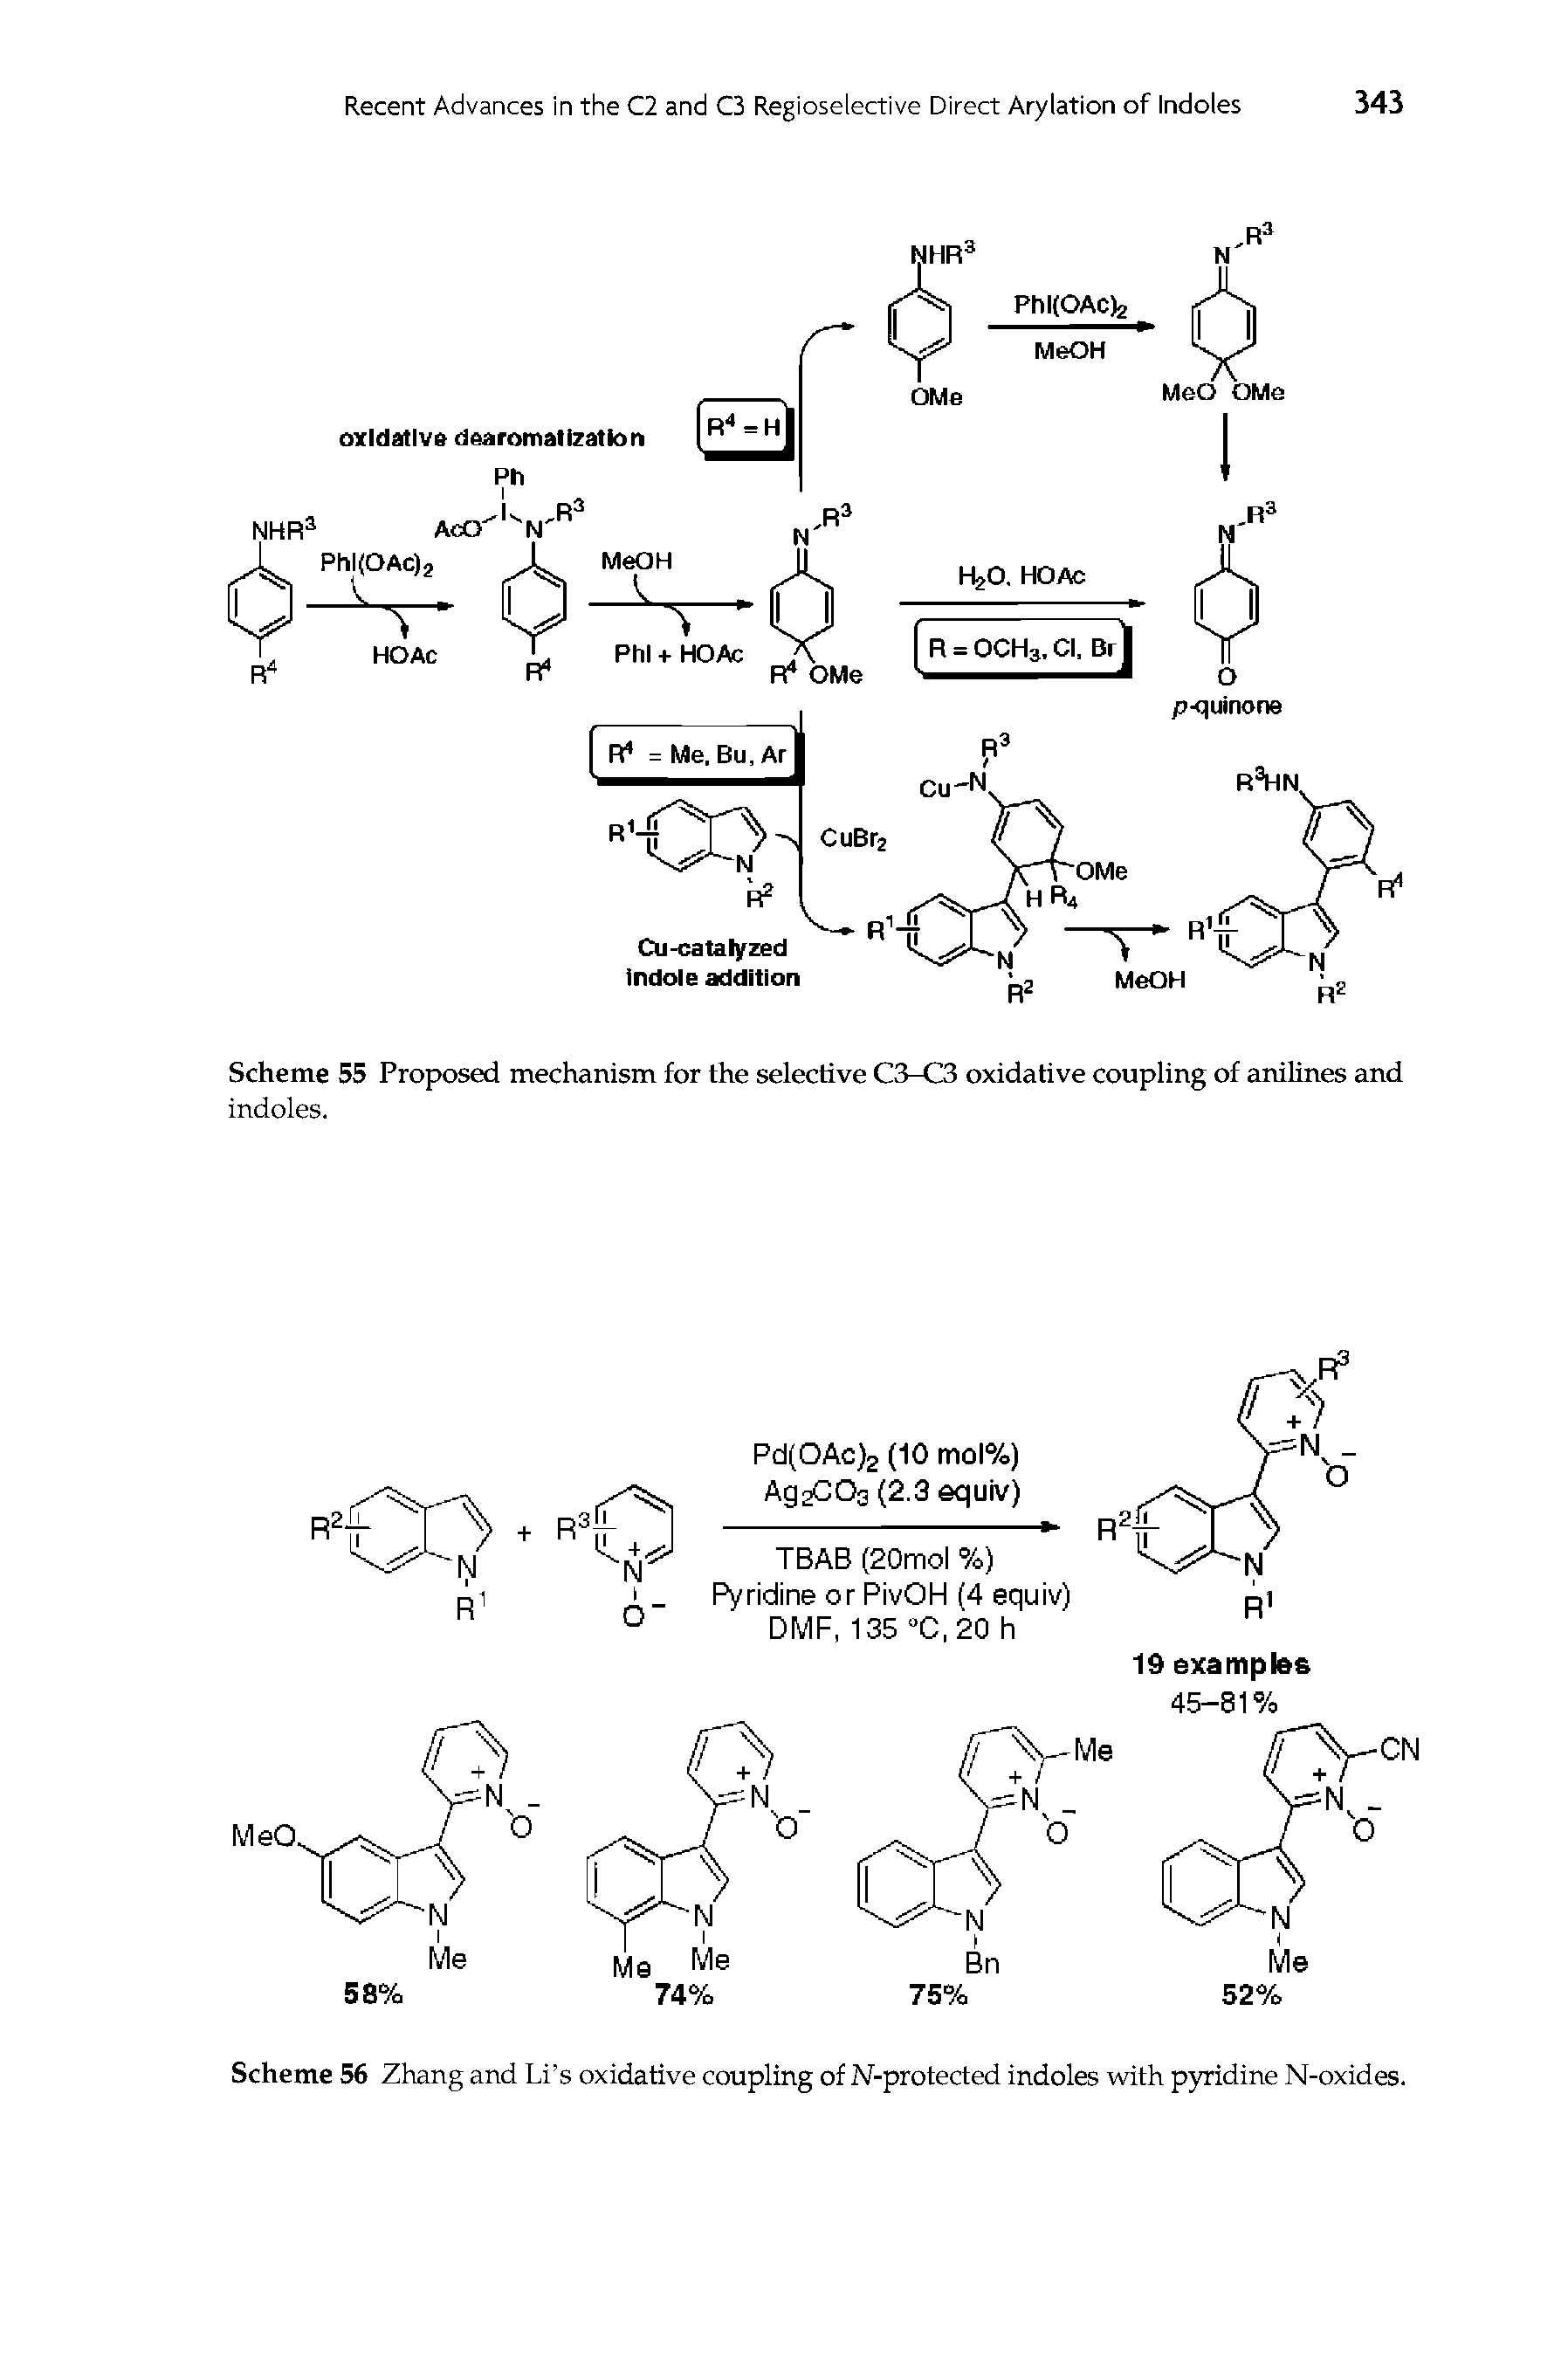 Scheme 56 Zhang and Li s oxidative coupling of N-protected indoles with pyridine N-oxides.